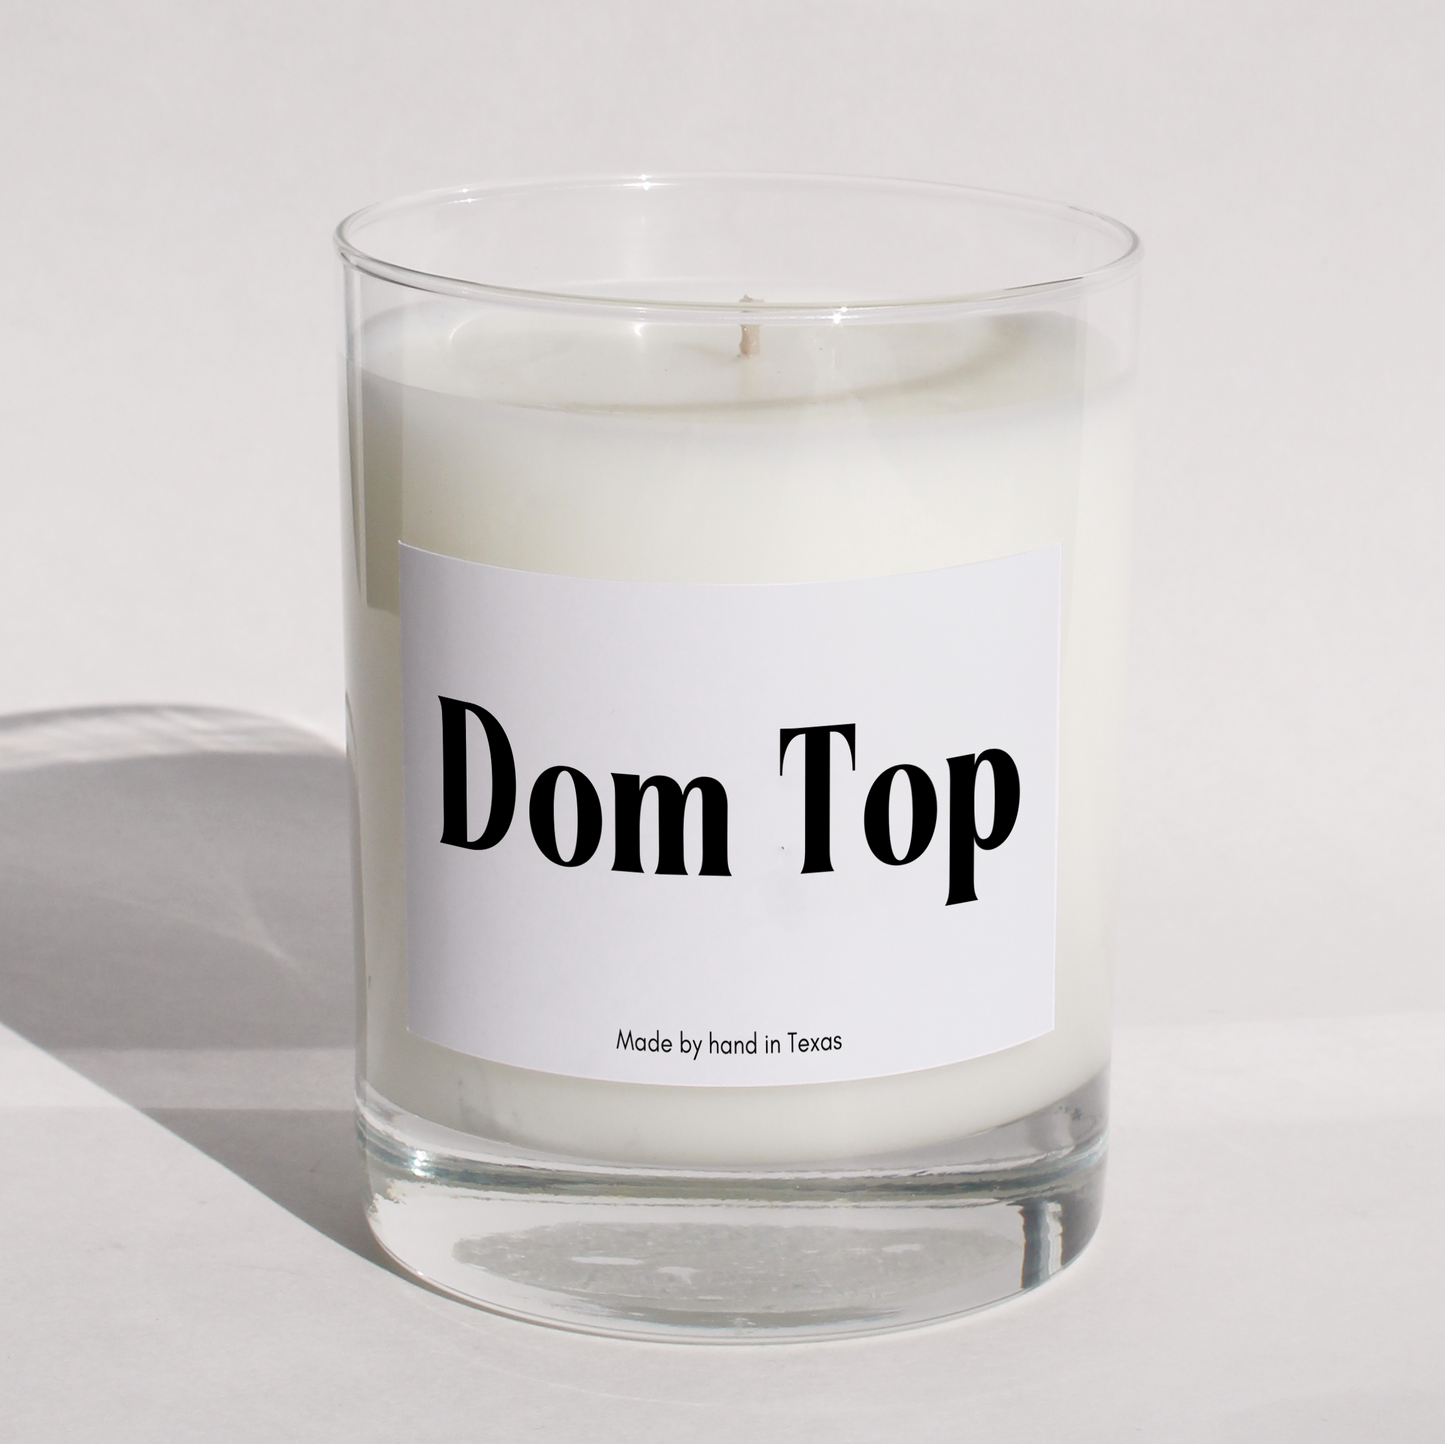 Dom Top - Naughty Candle